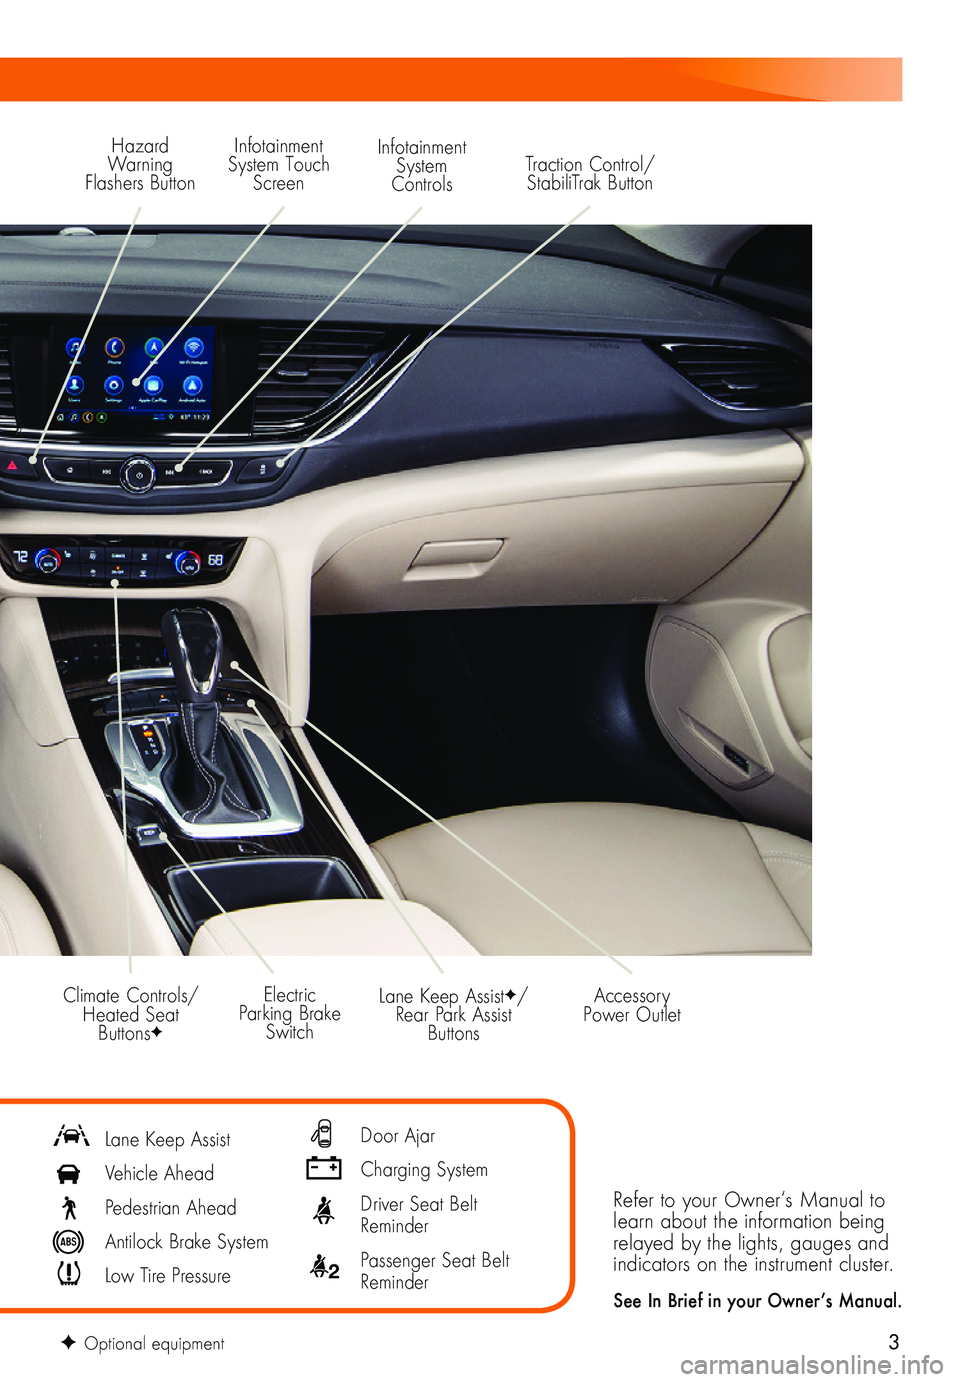 BUICK REGAL TOURX 2019  Get To Know Guide 3
Refer to your Owner‘s Manual to learn about the information being relayed by the lights, gauges and indicators on the instrument cluster.
See In Brief in your Owner’s Manual.
Lane Keep AssistF/R